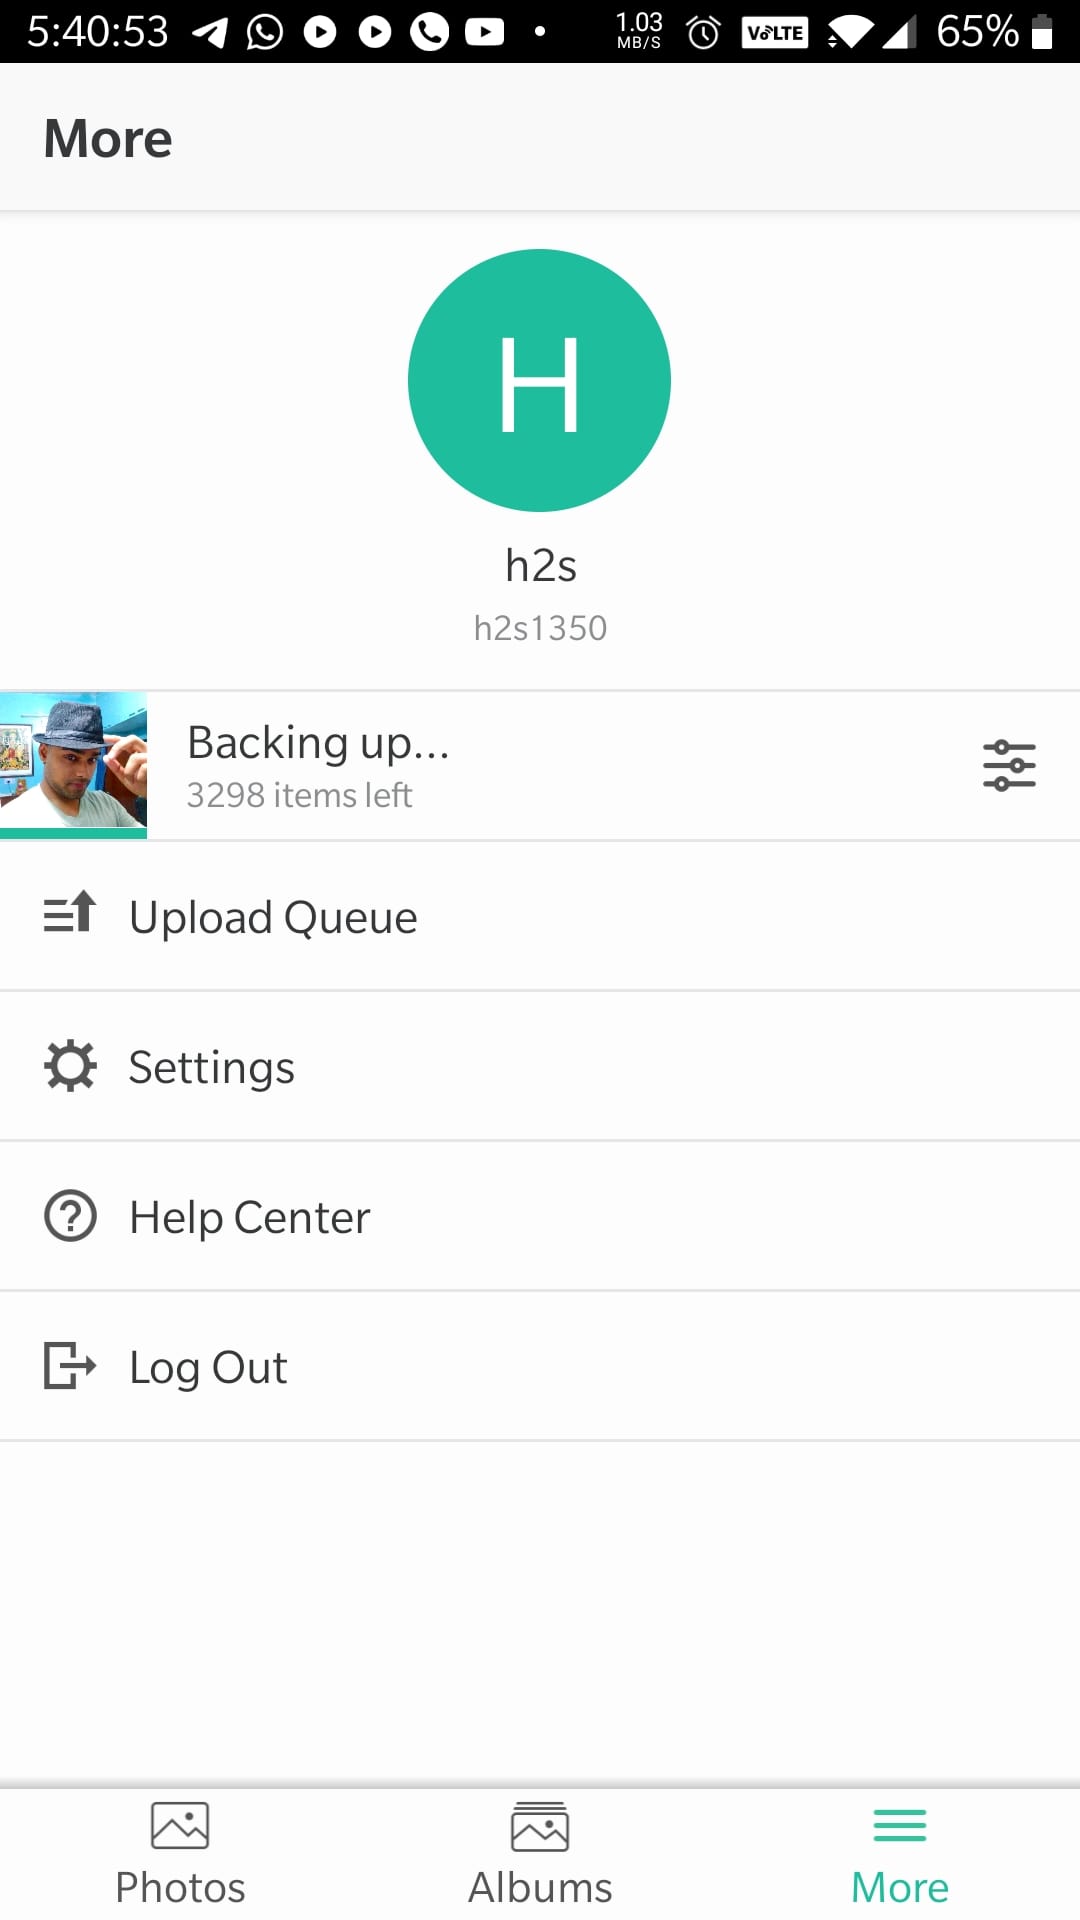 Backing up photos on Synology NAS from Smartphone min